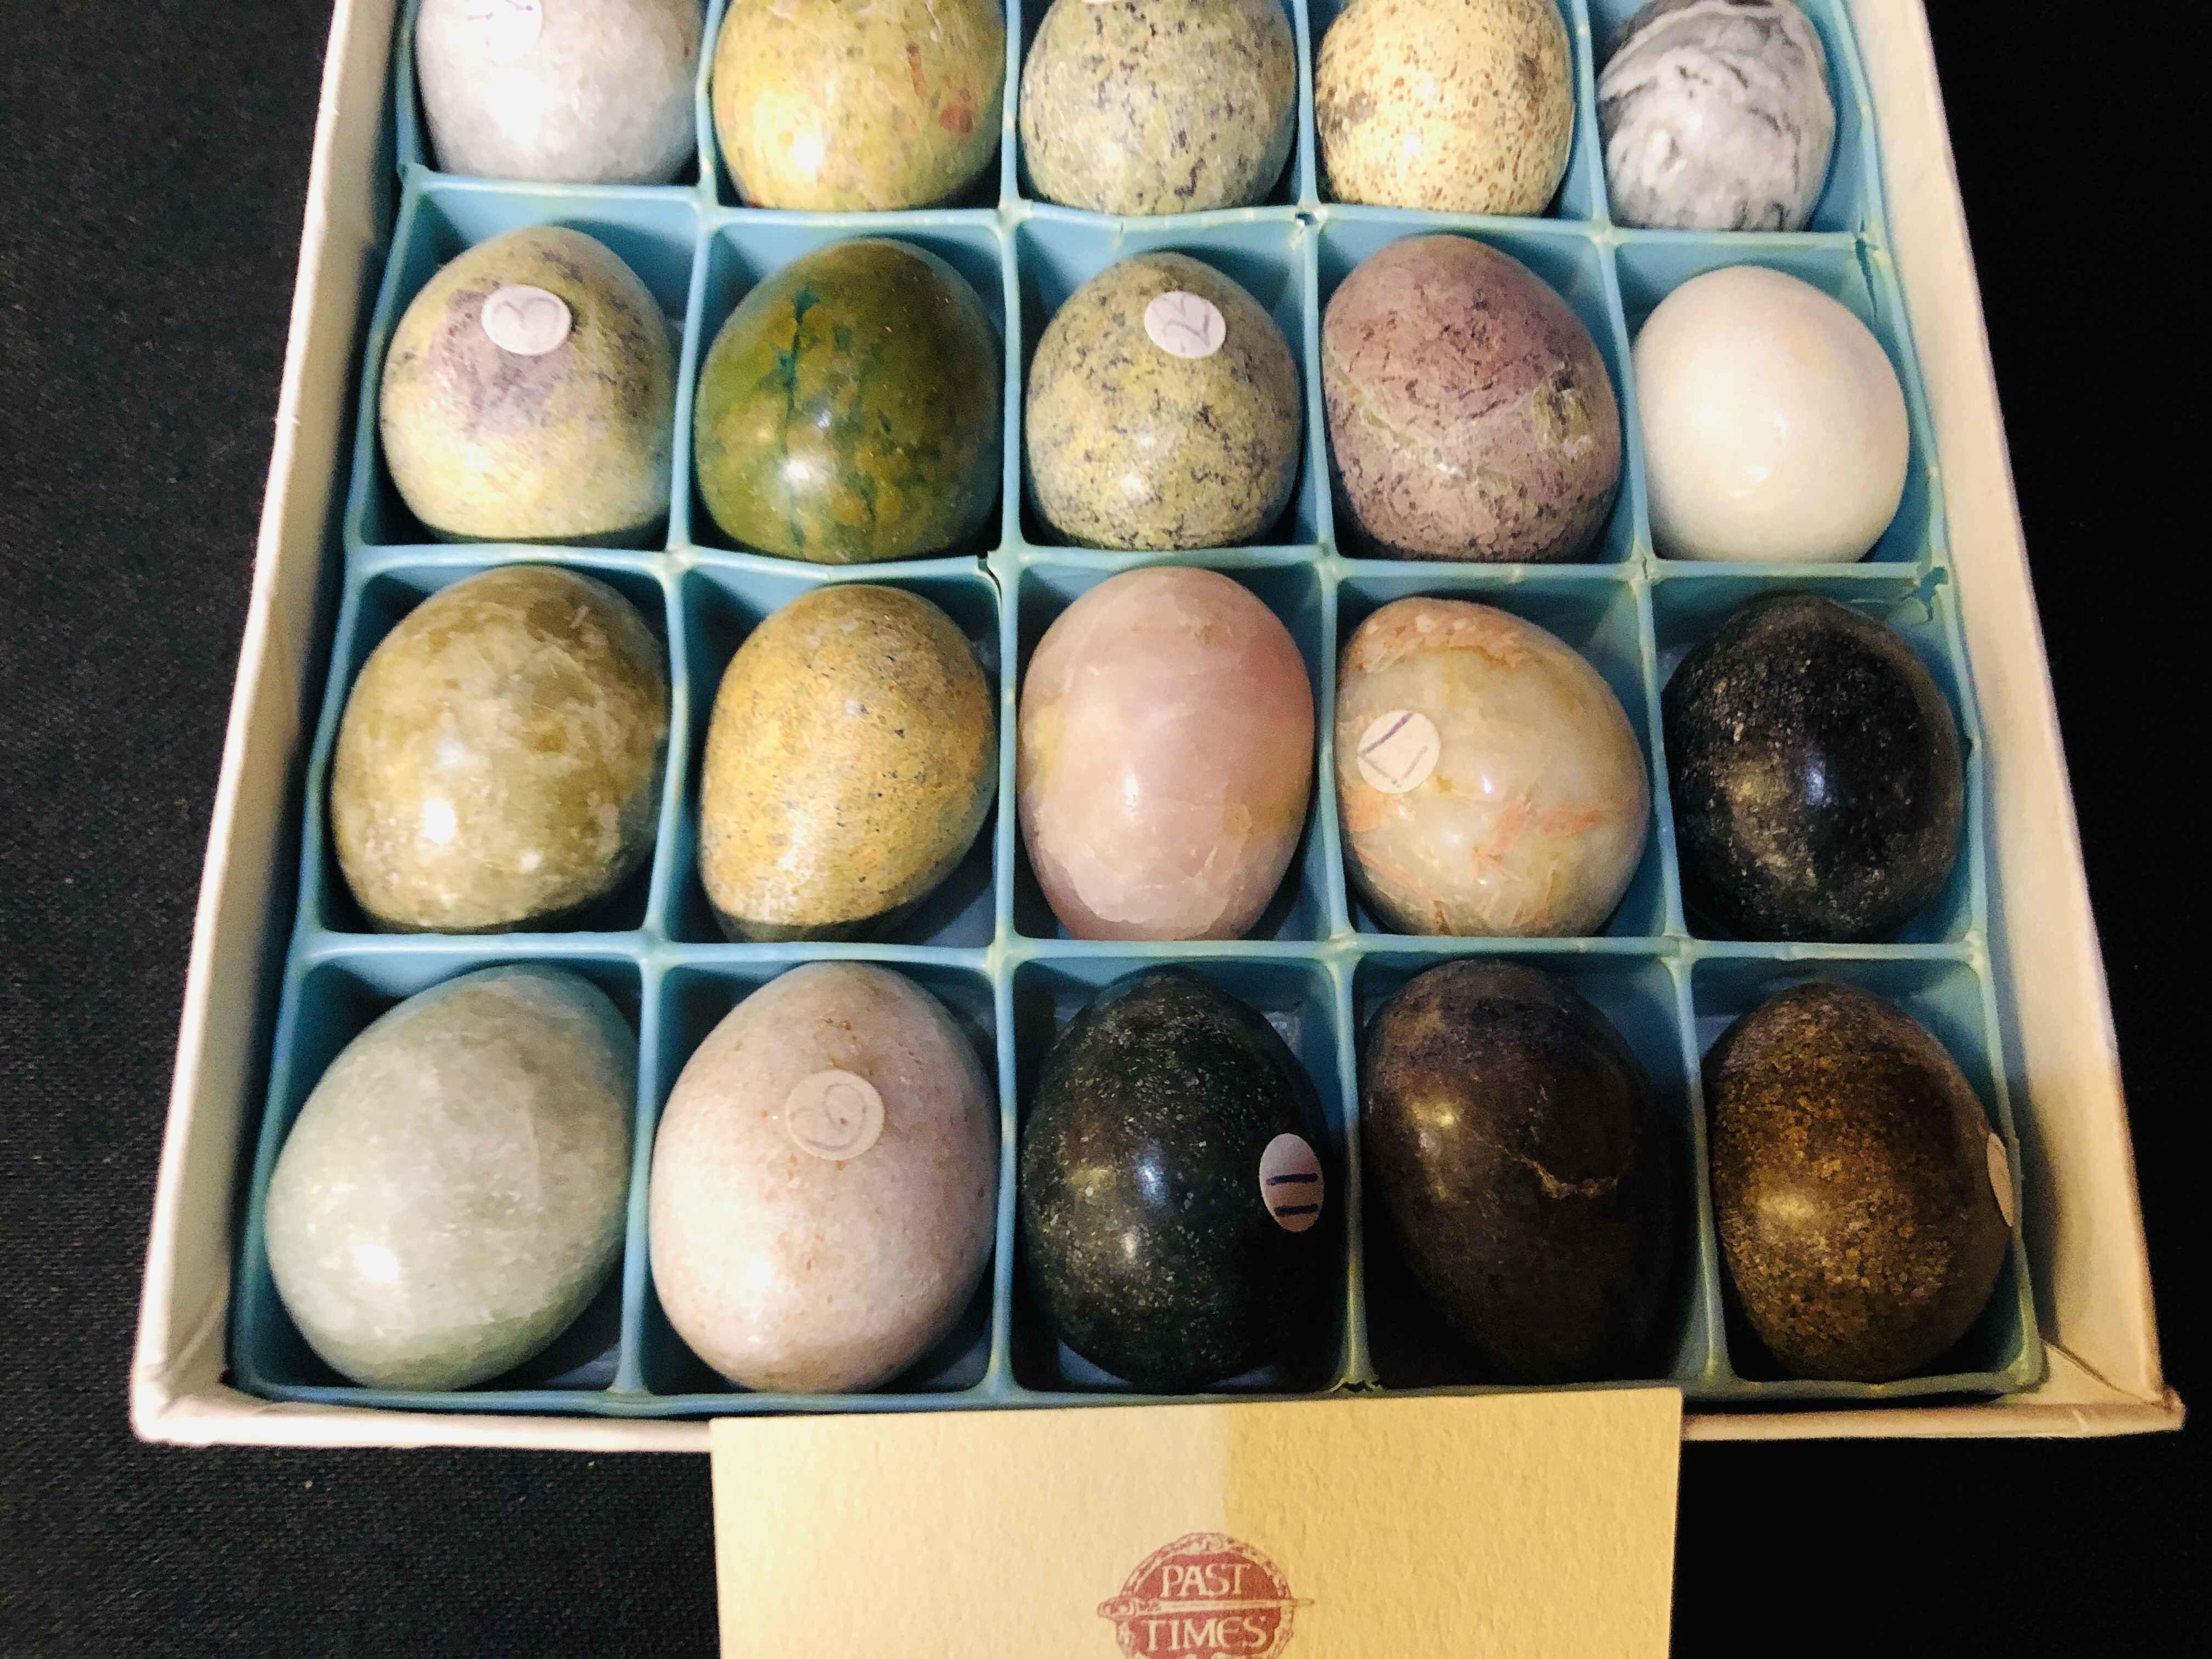 PAST TIMES SEMI-PRECIOUS STONE EGG COLLECTION, 25 IN TOTAL, IN ORIGINAL FITTED DISPLAY BOX. - Image 2 of 4